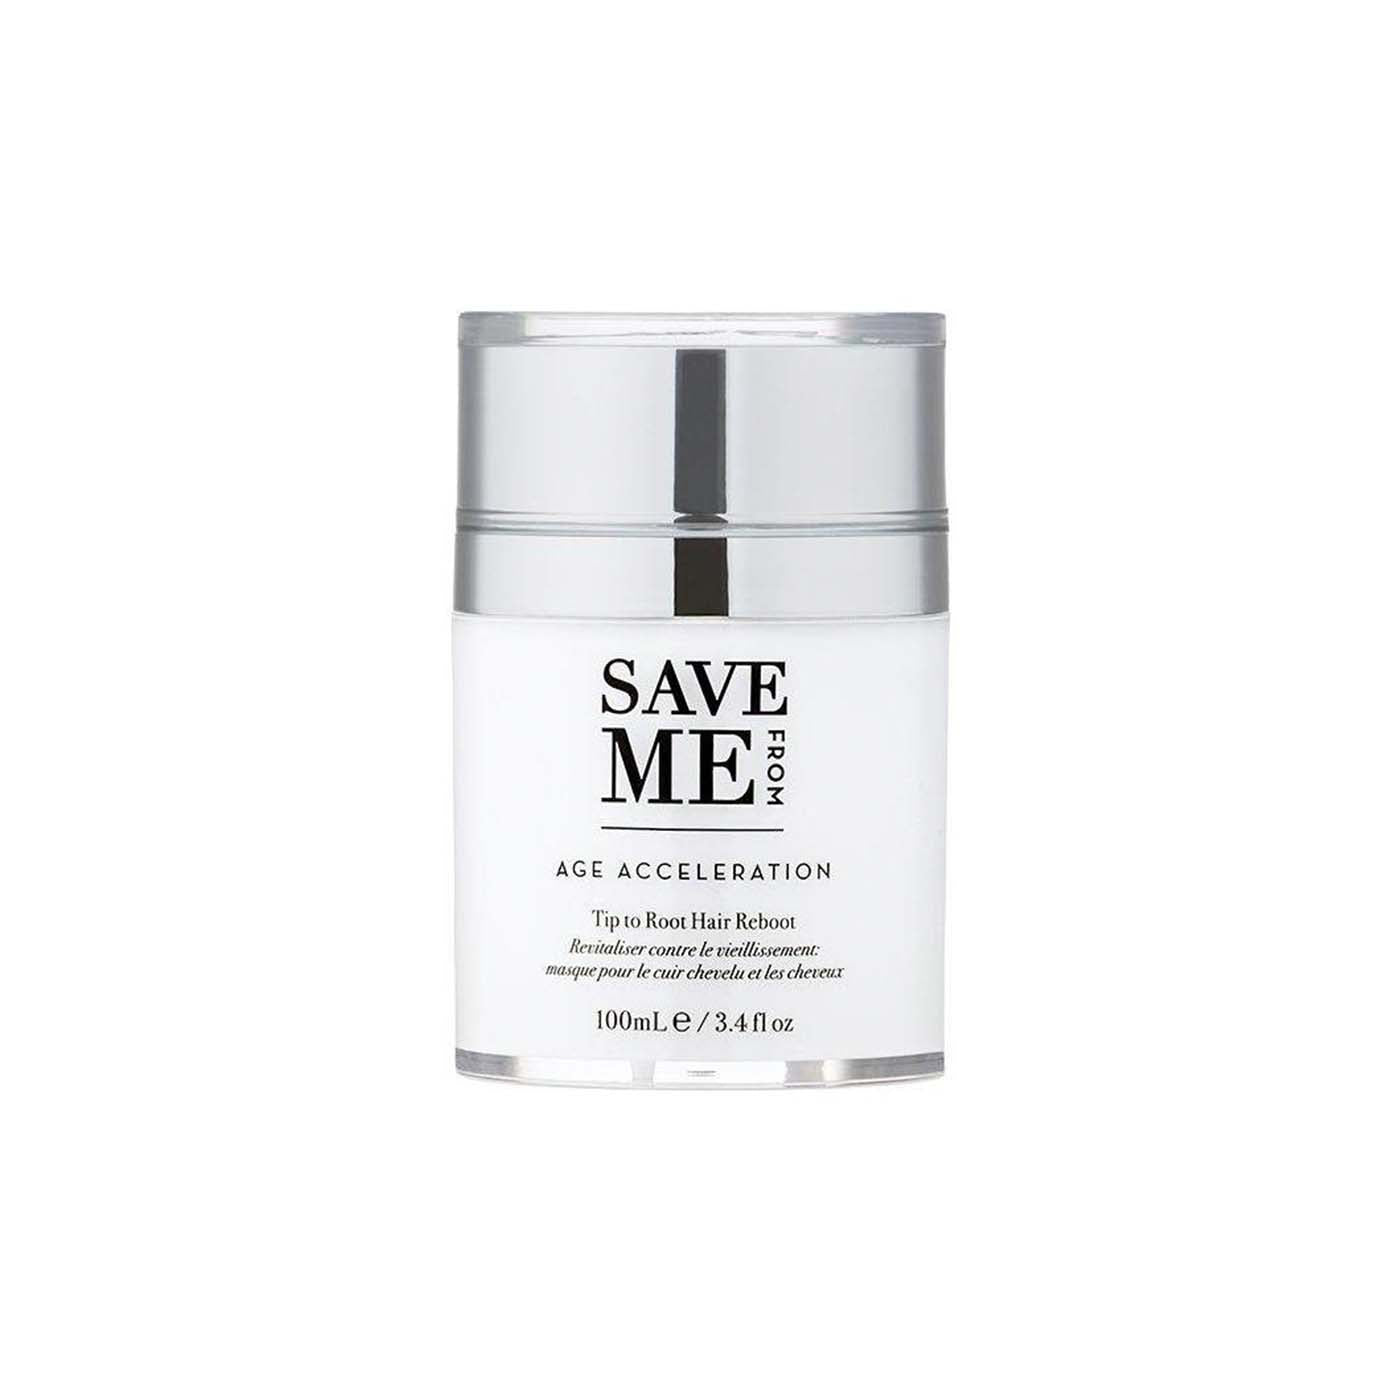 AGE ACCELERATION - Tip to Root Hair Reboot 3.4 fl oz | Save Me From